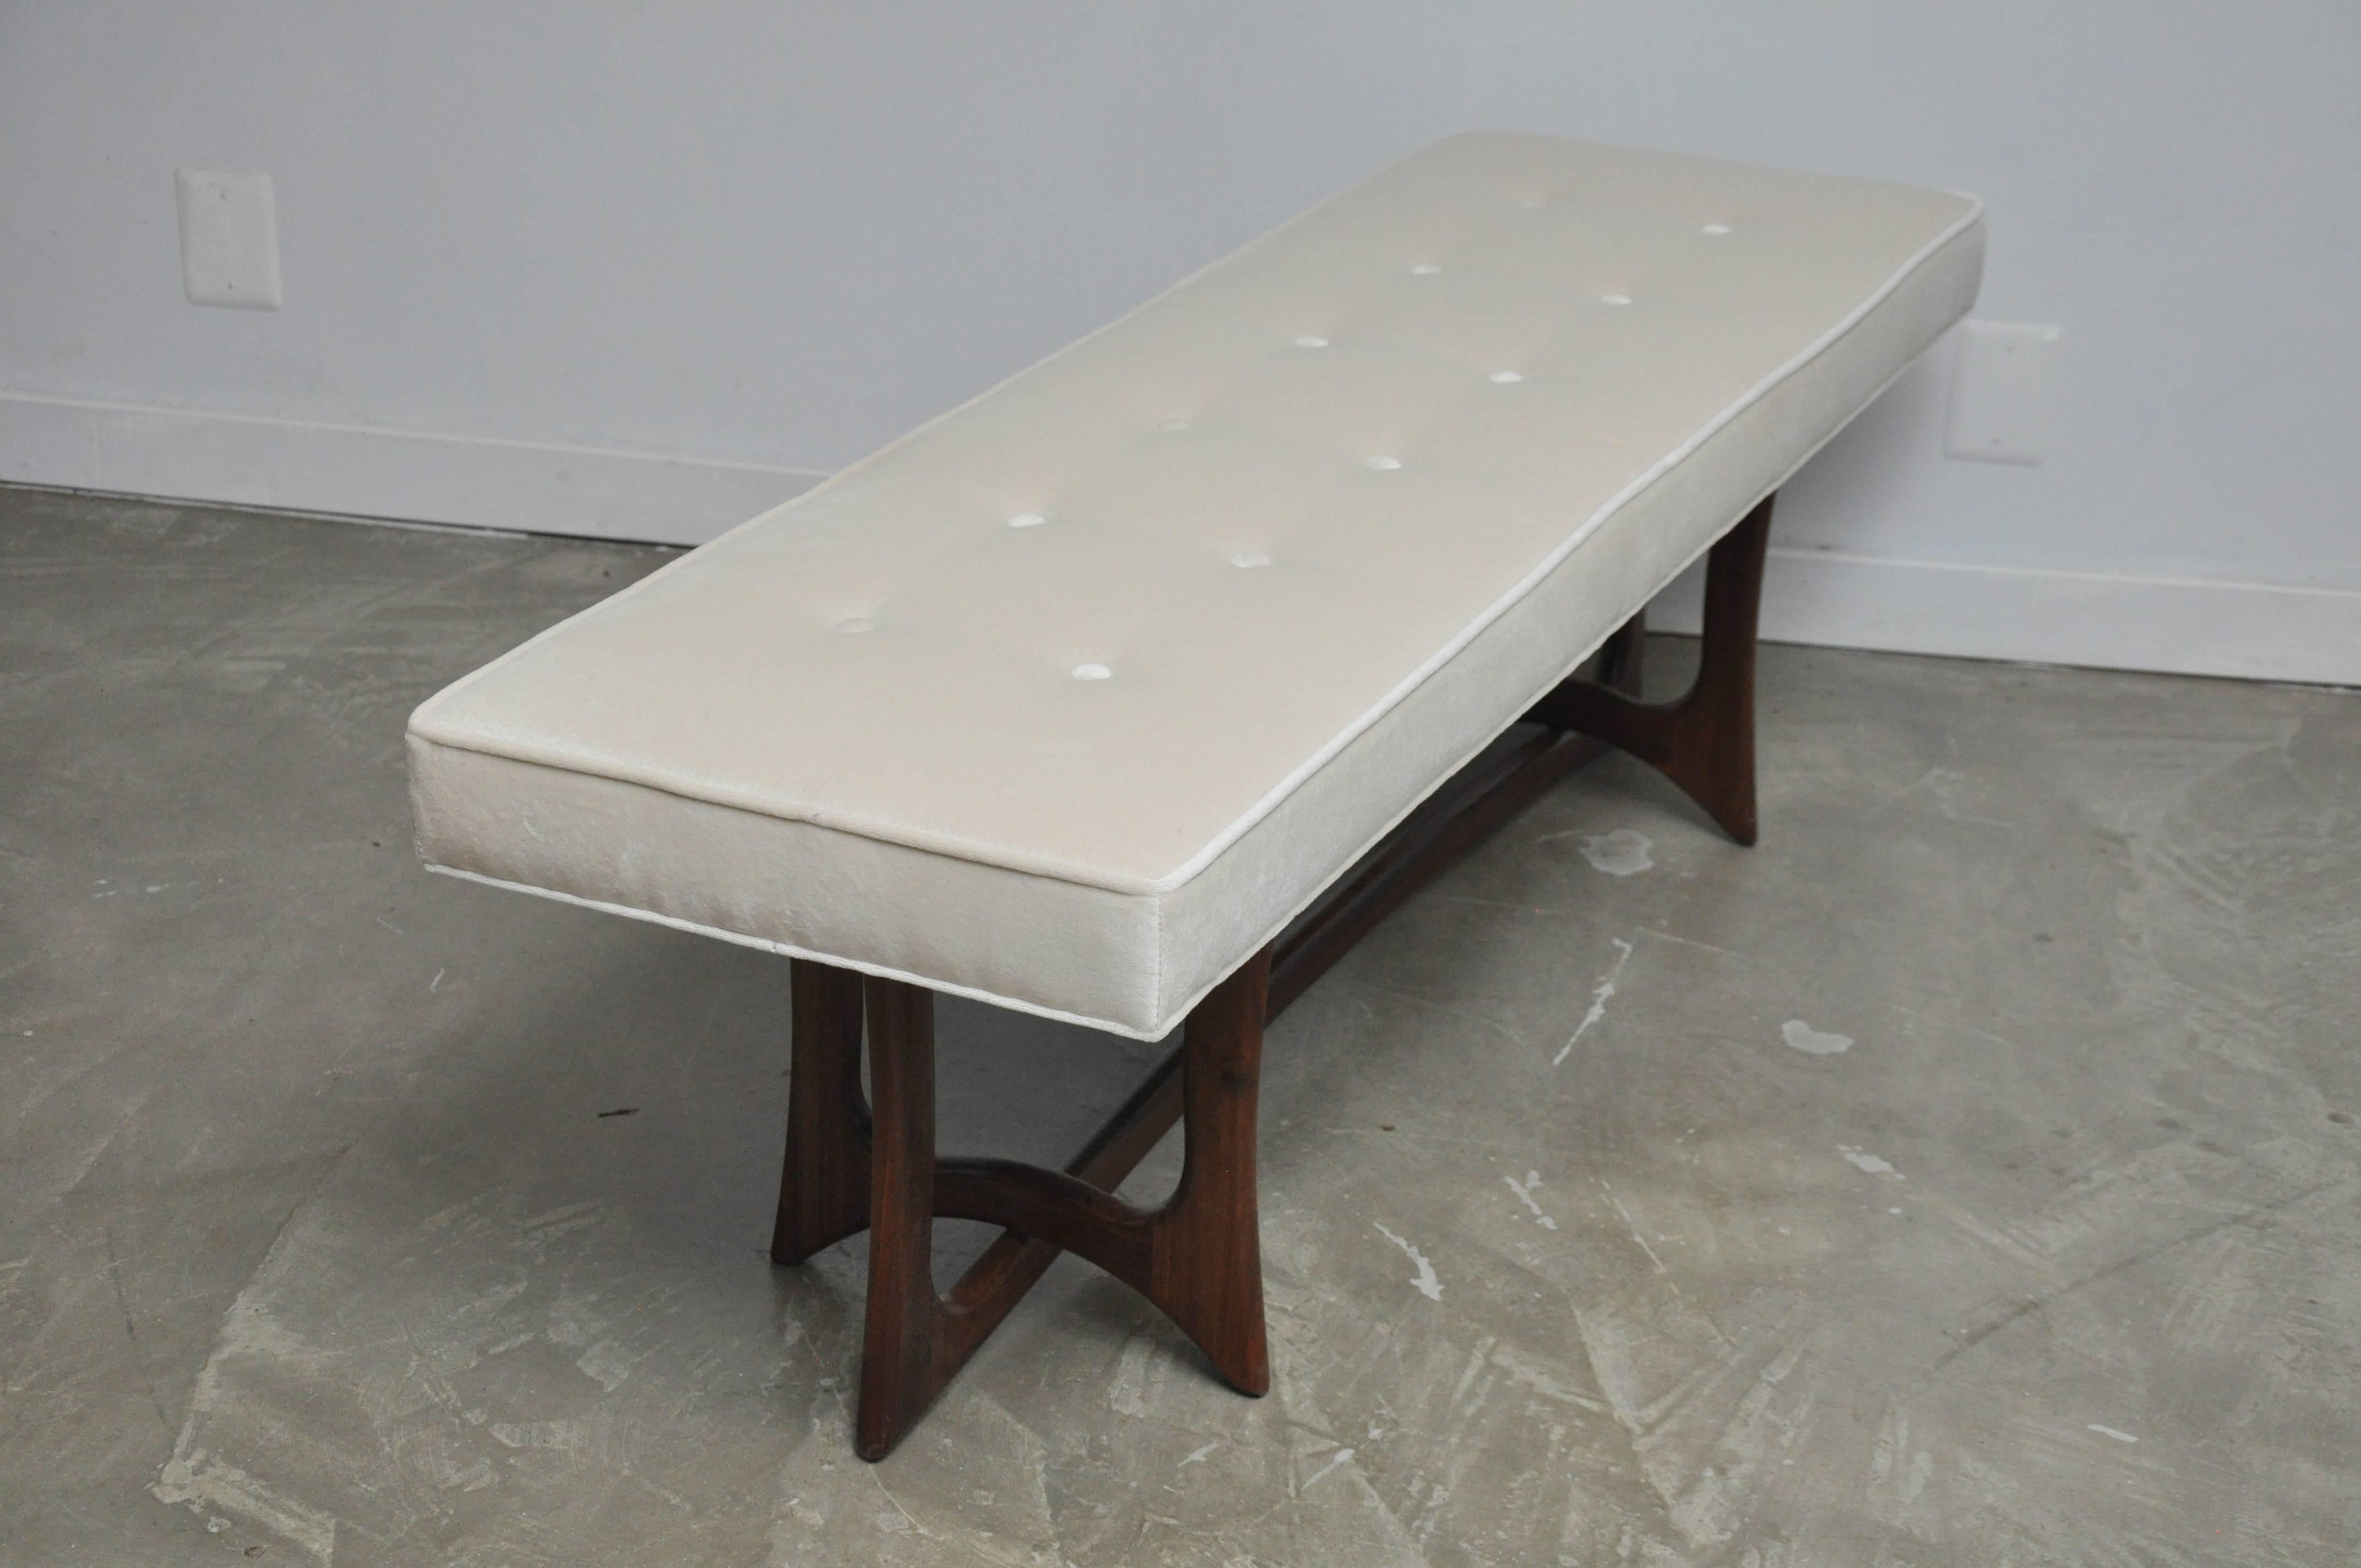 20th Century Sculptural Walnut Bench with Cream Upholstery, Adrian Pearsall